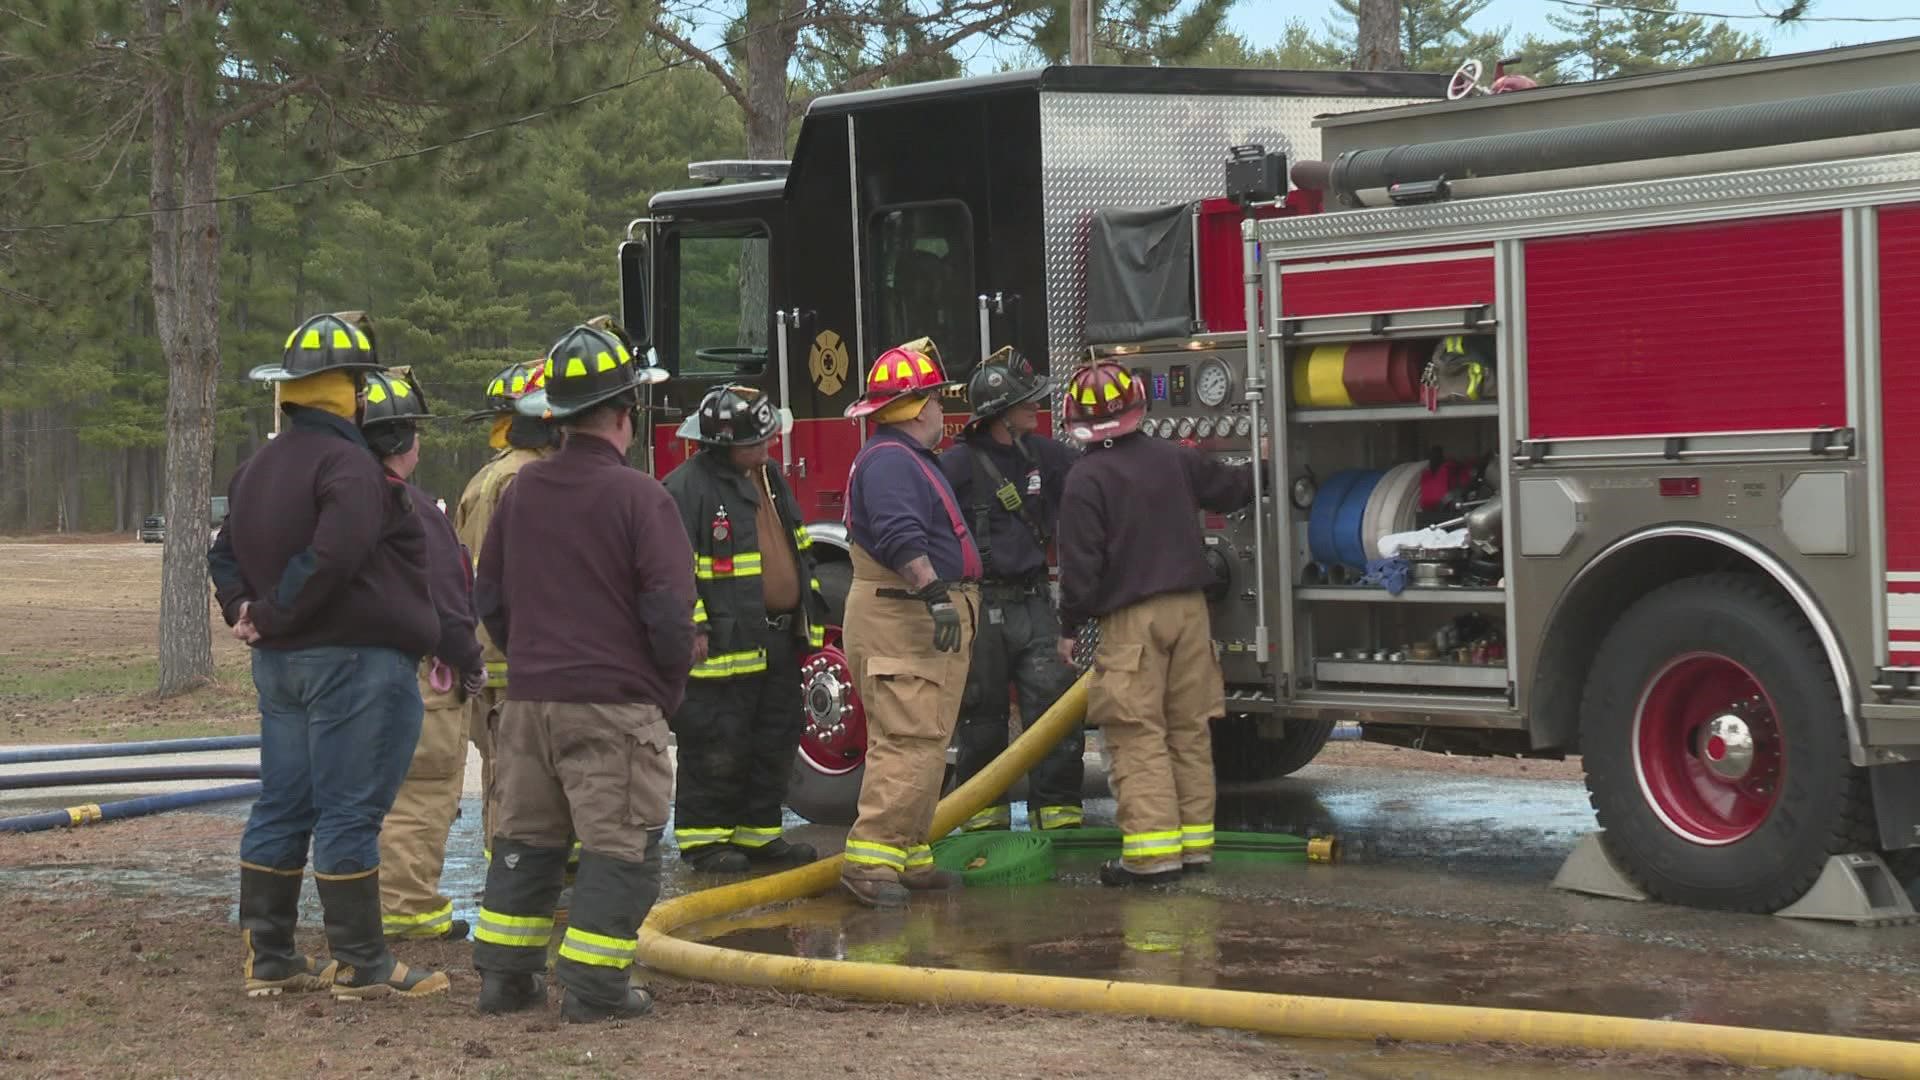 More than 30 firefighters from crews across Western Maine were trained in pump operations over the weekend at the Fryeburg Fairgrounds